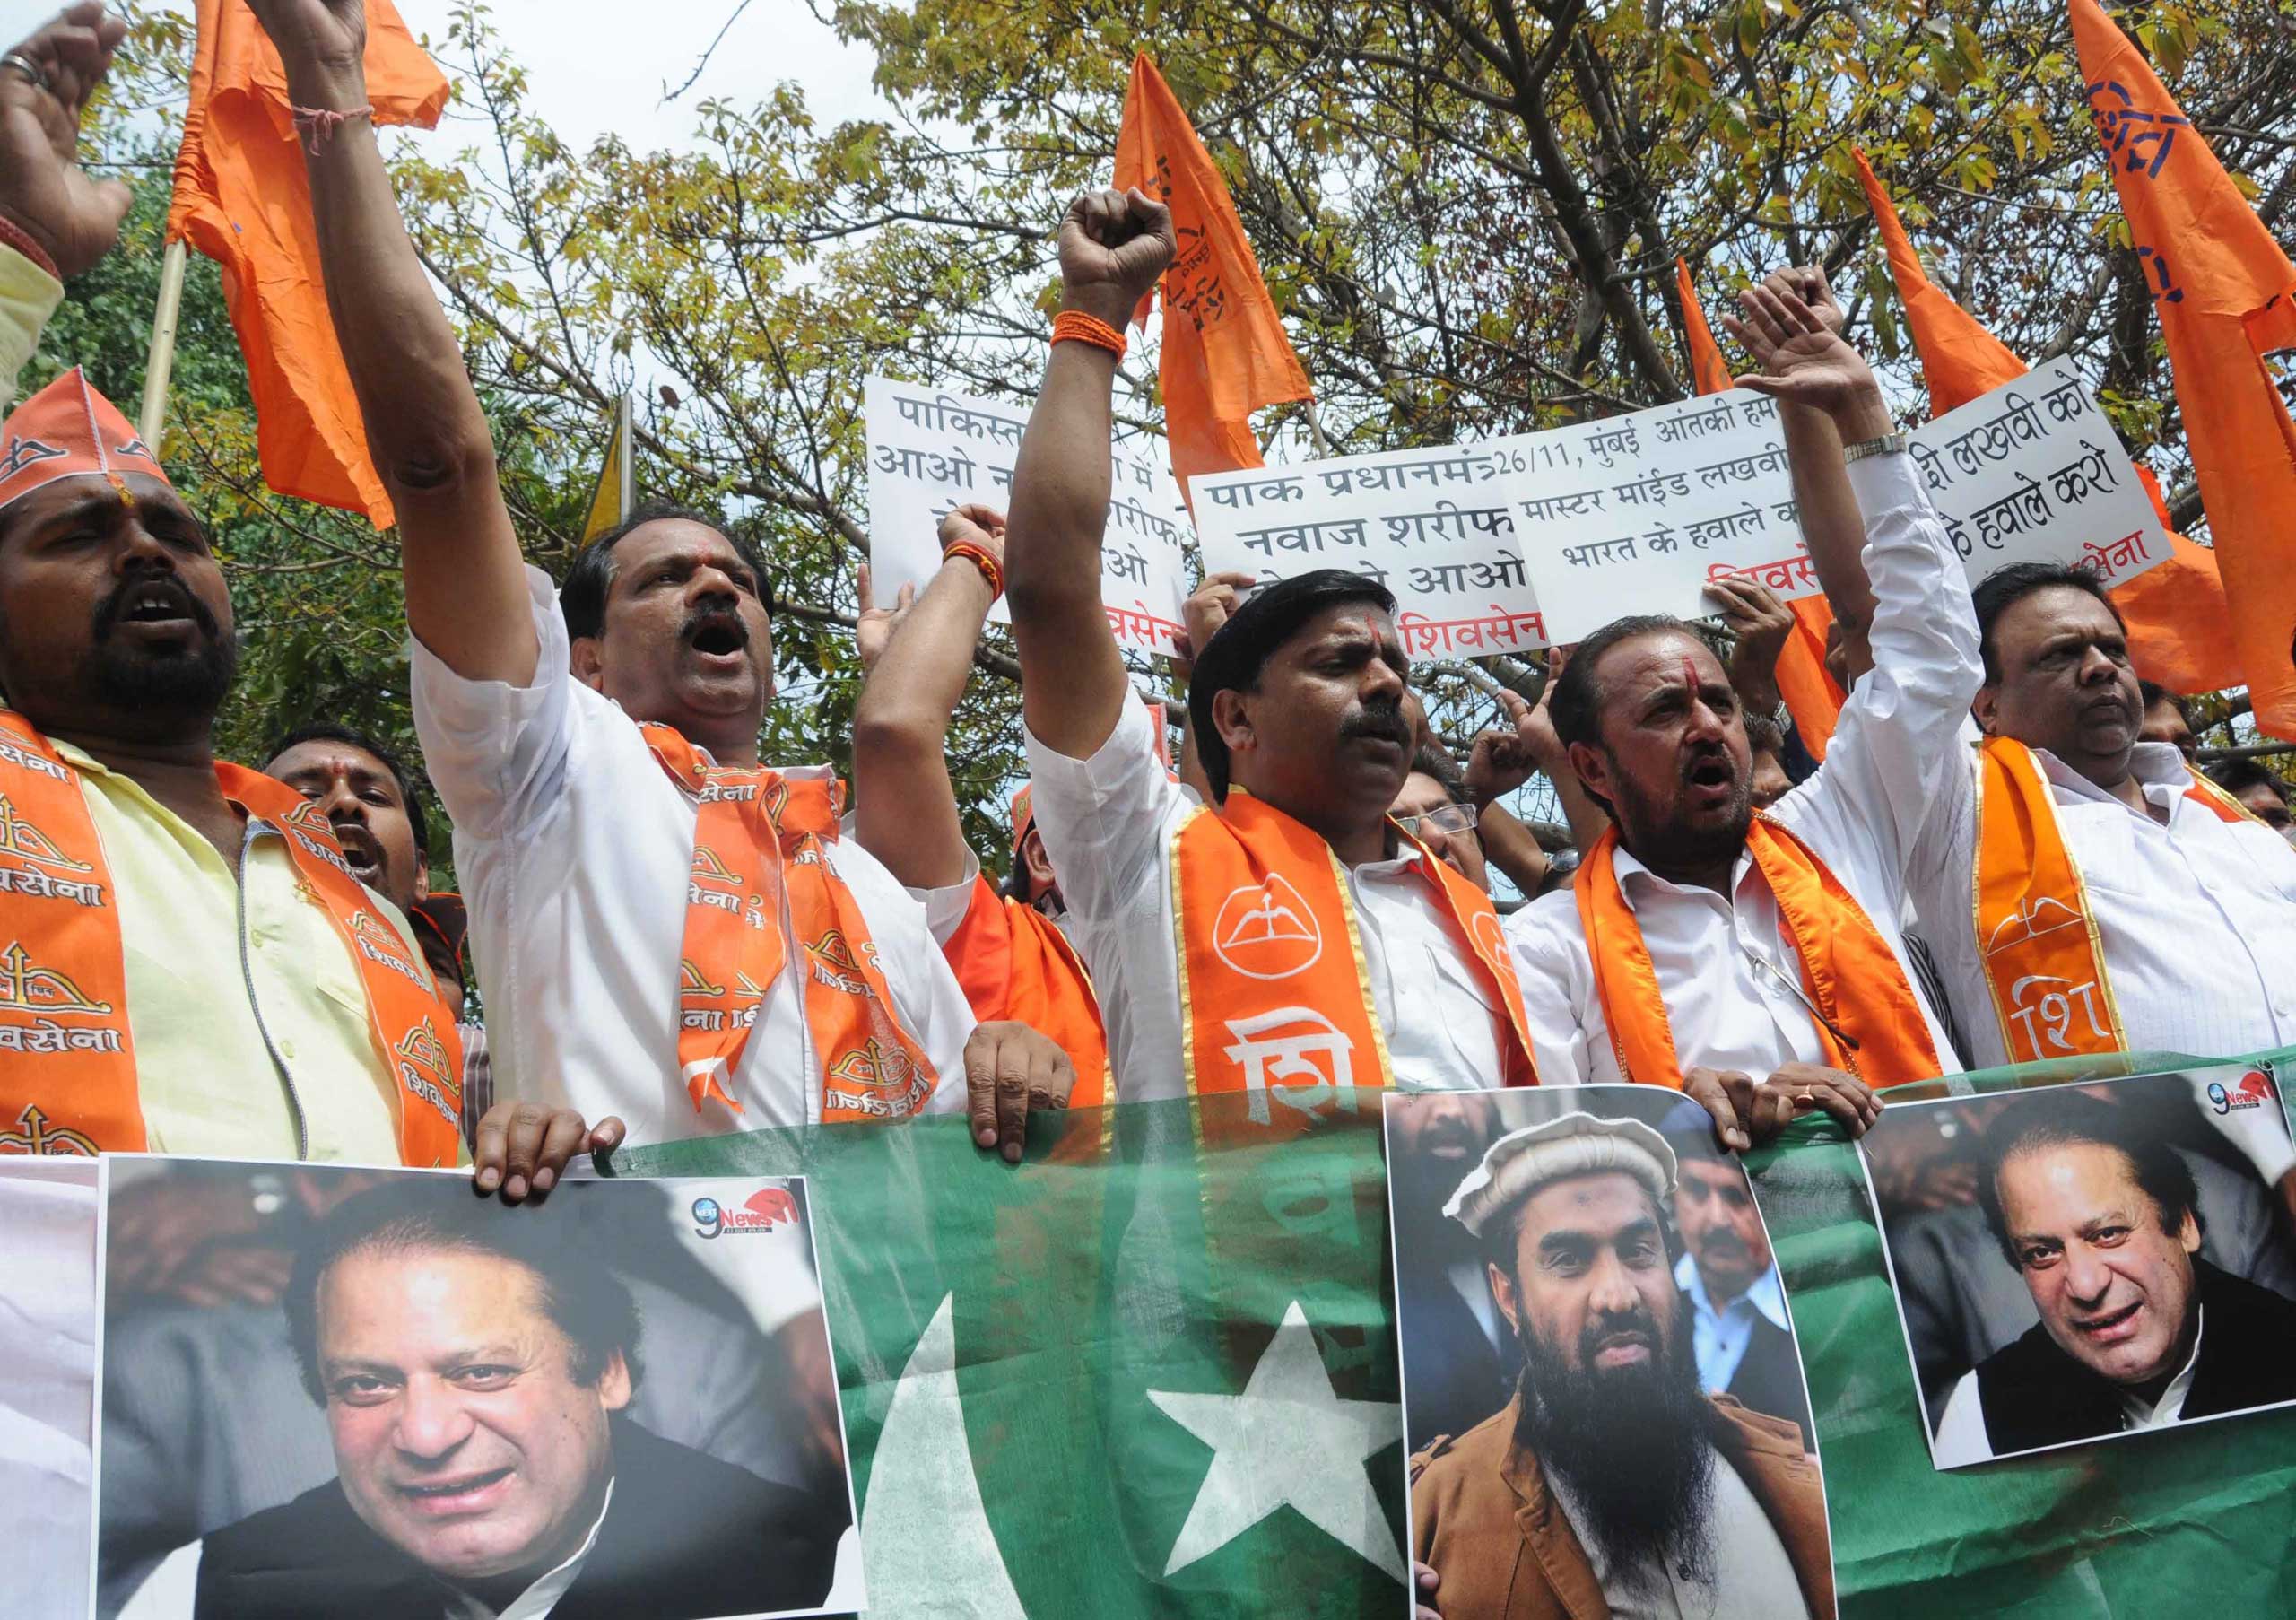 Activists of India's right-wing Shiv Sena party shout slogans before they burnt posters of Pakistani Prime Minister Nawaz Sharif and Zaki-ur-Rehman Lakhvi (C-bottom), alleged mastermind of the 2008 Mumbai attacks during a protest against Zaki-ur-Rehman's release, in New Delhi, on April 11, 2015. (EPA)